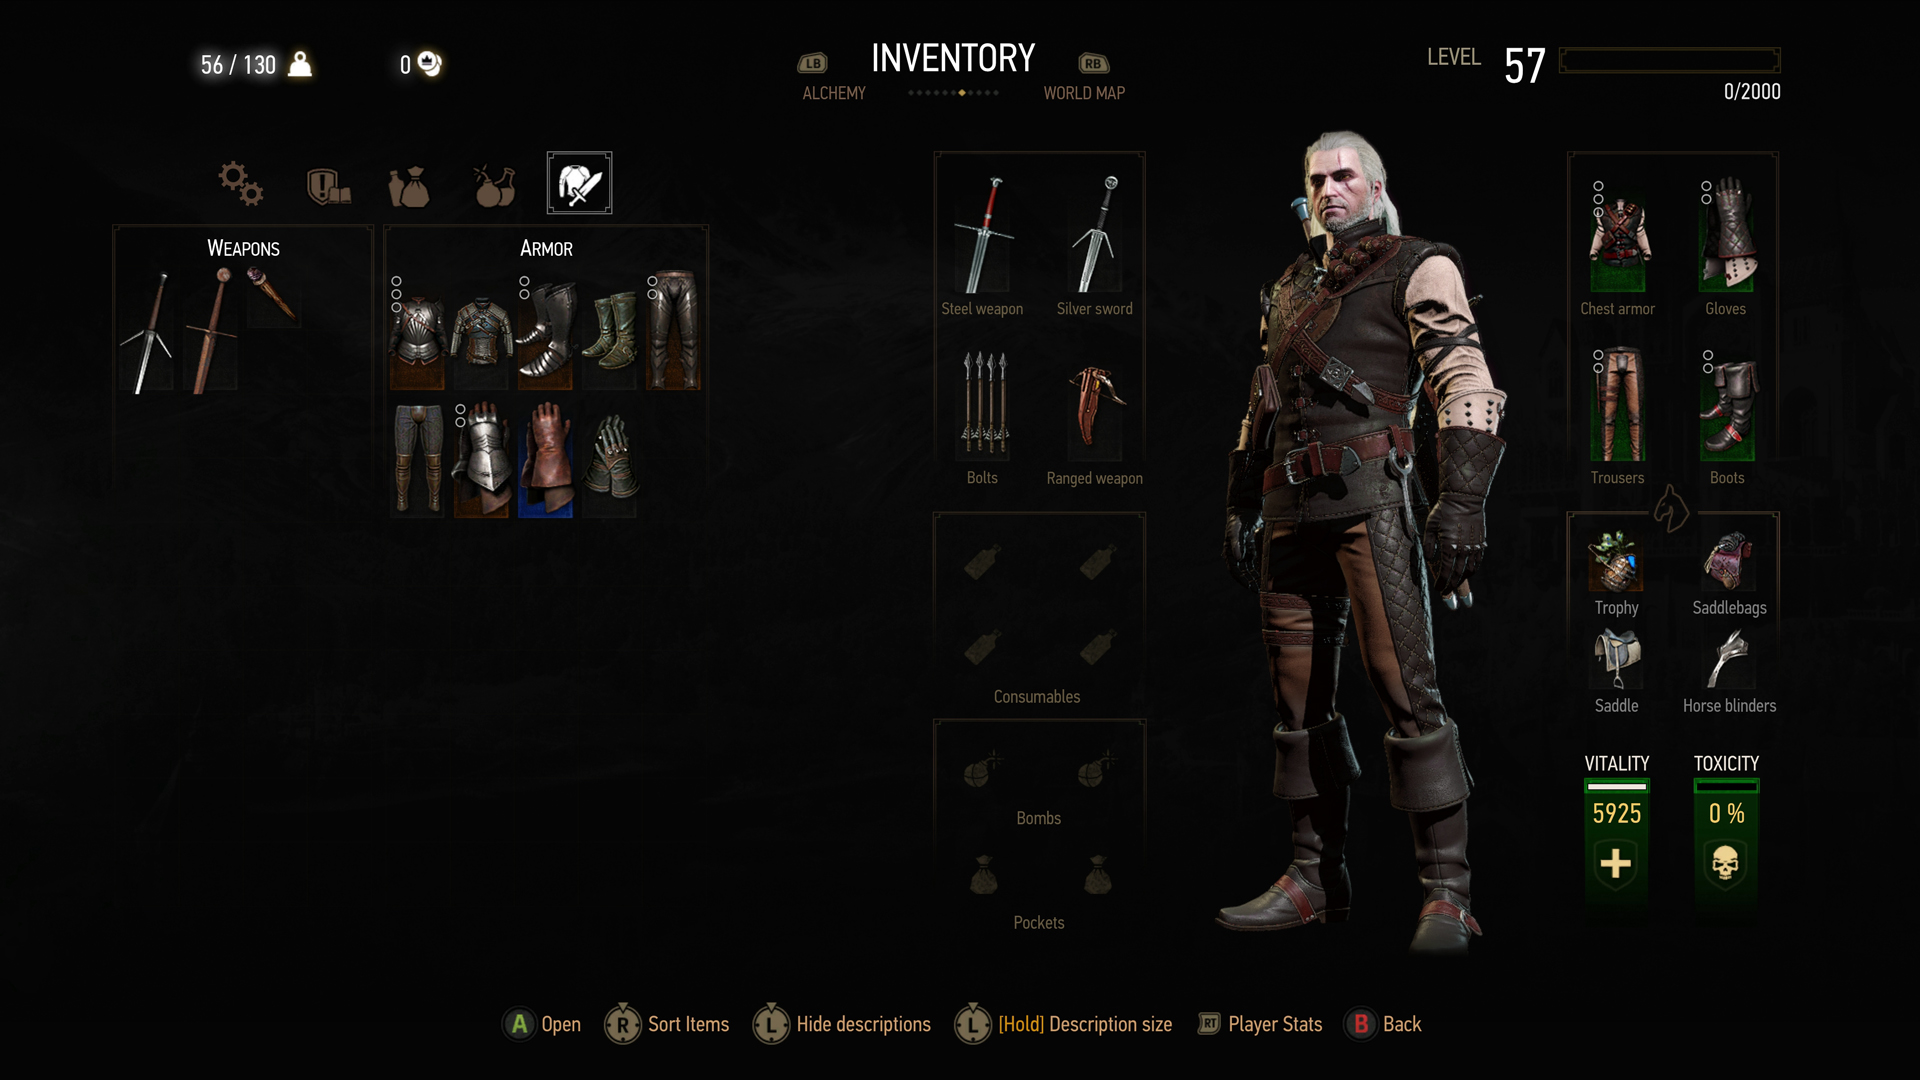 The Witcher 3: Wild Hunt - Blood and Wine customization